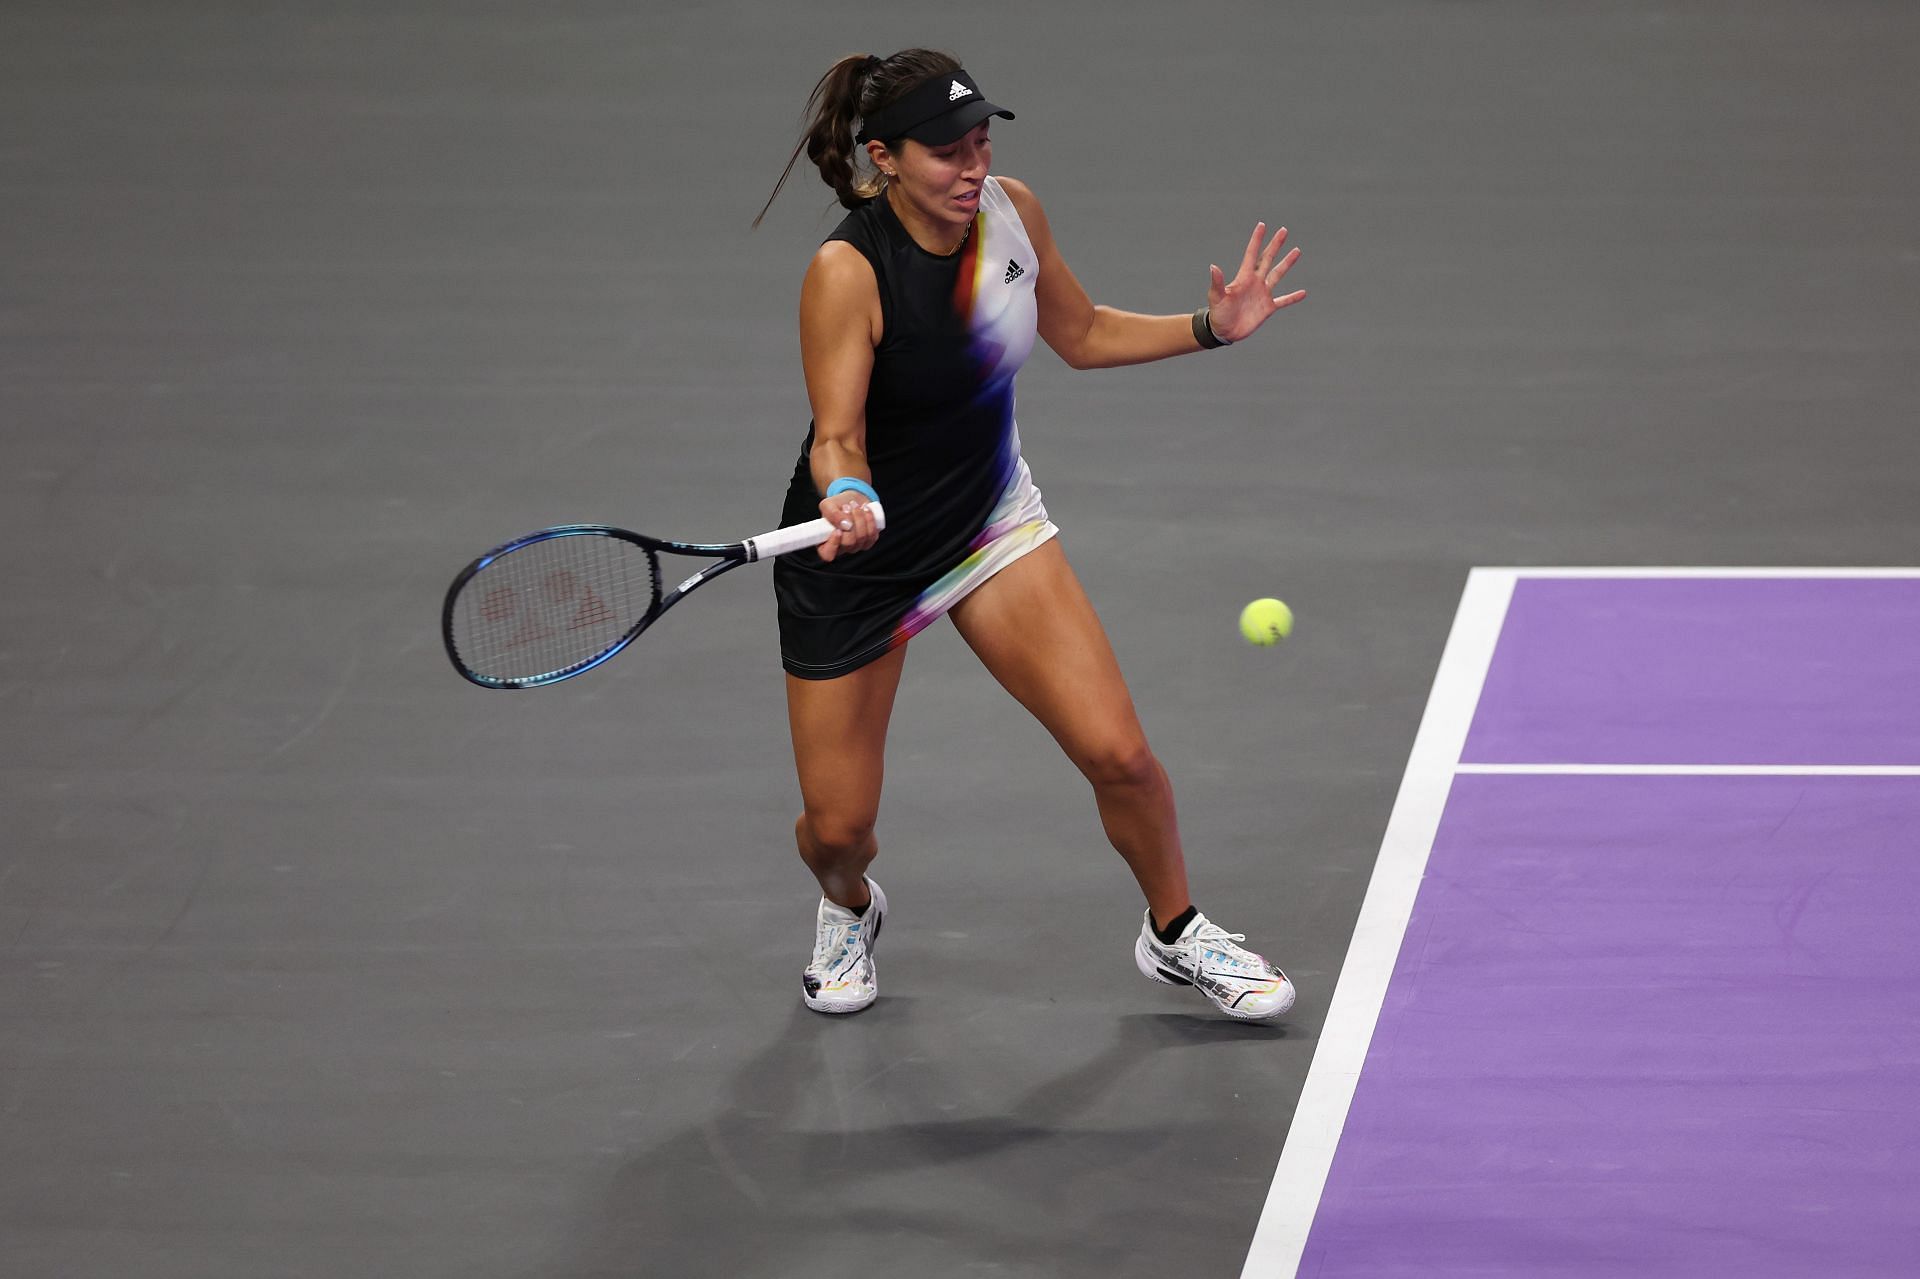 WTA Finals 2022 Schedule Today TV Schedule, start time, order of play, live stream details and more Day 5